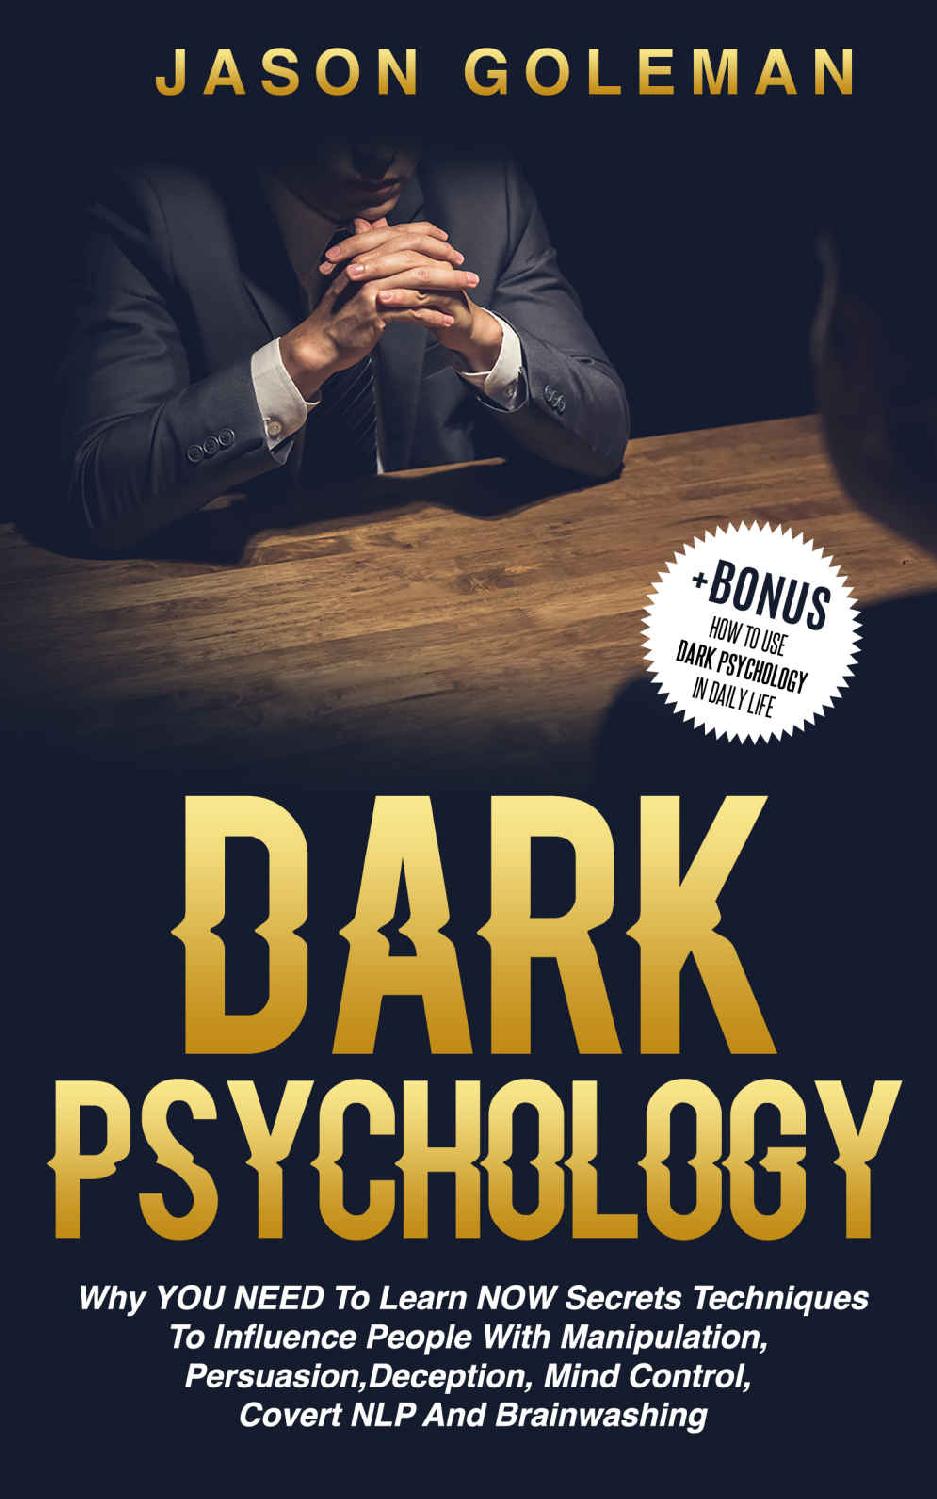 Dark Psychology: Why YOU NEED to Learn NOW Secrets Techniques to Influence People with Manipulation, Persuasion, Deception, Mind Control, Covert NLP and Brainwashing + BONUS